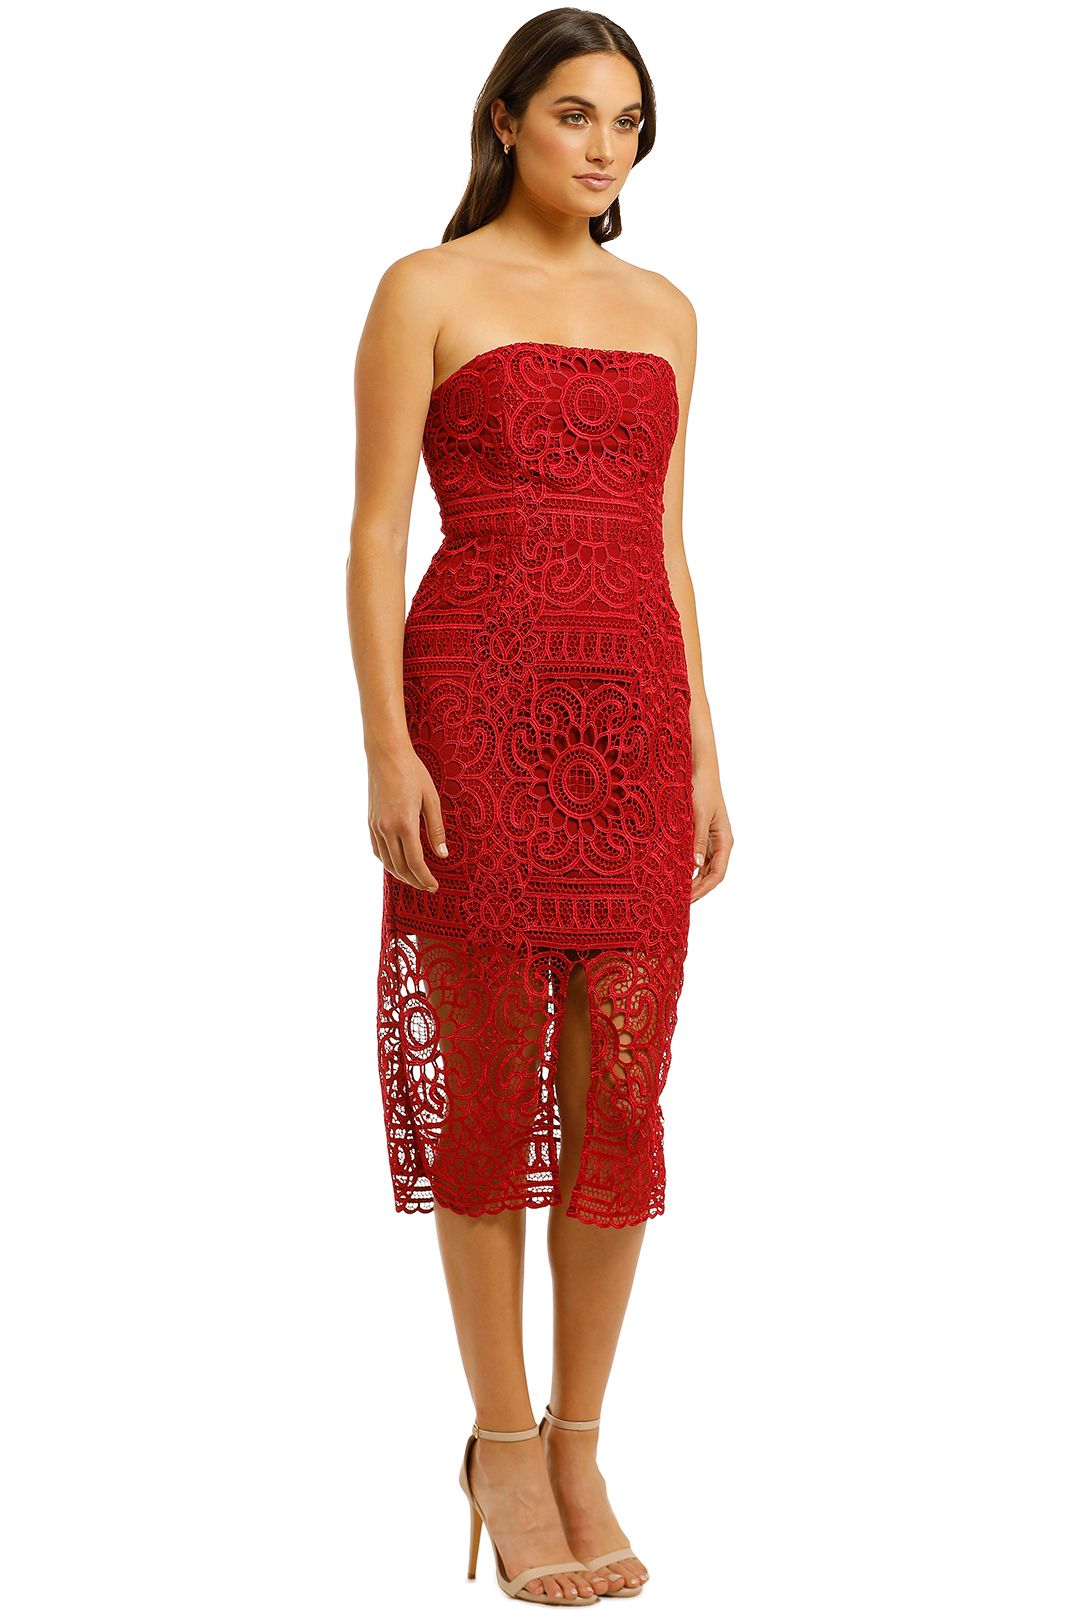 Lace Strapless Dress in Red by Nicholas the Label for Hire